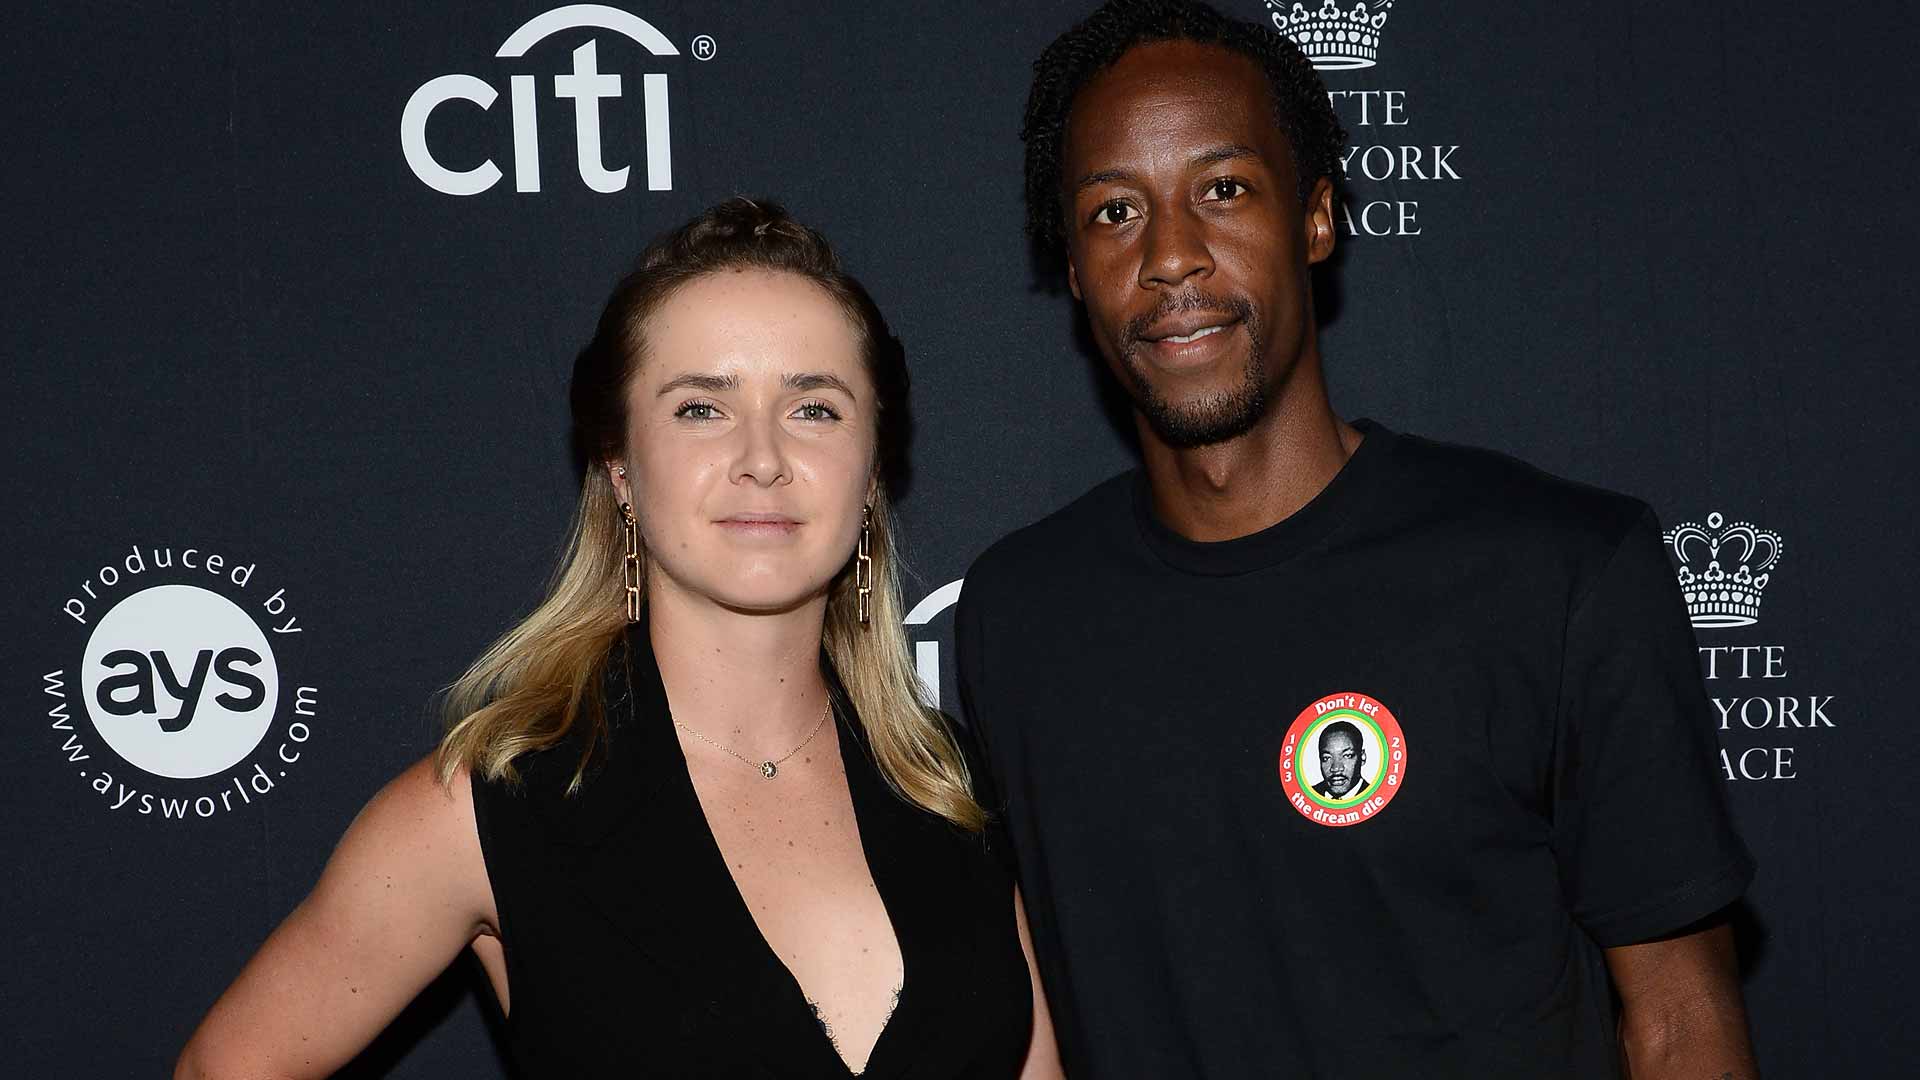 Elina Svitolina and Gael Monfils revealed the news of their engagement Saturday on social media.